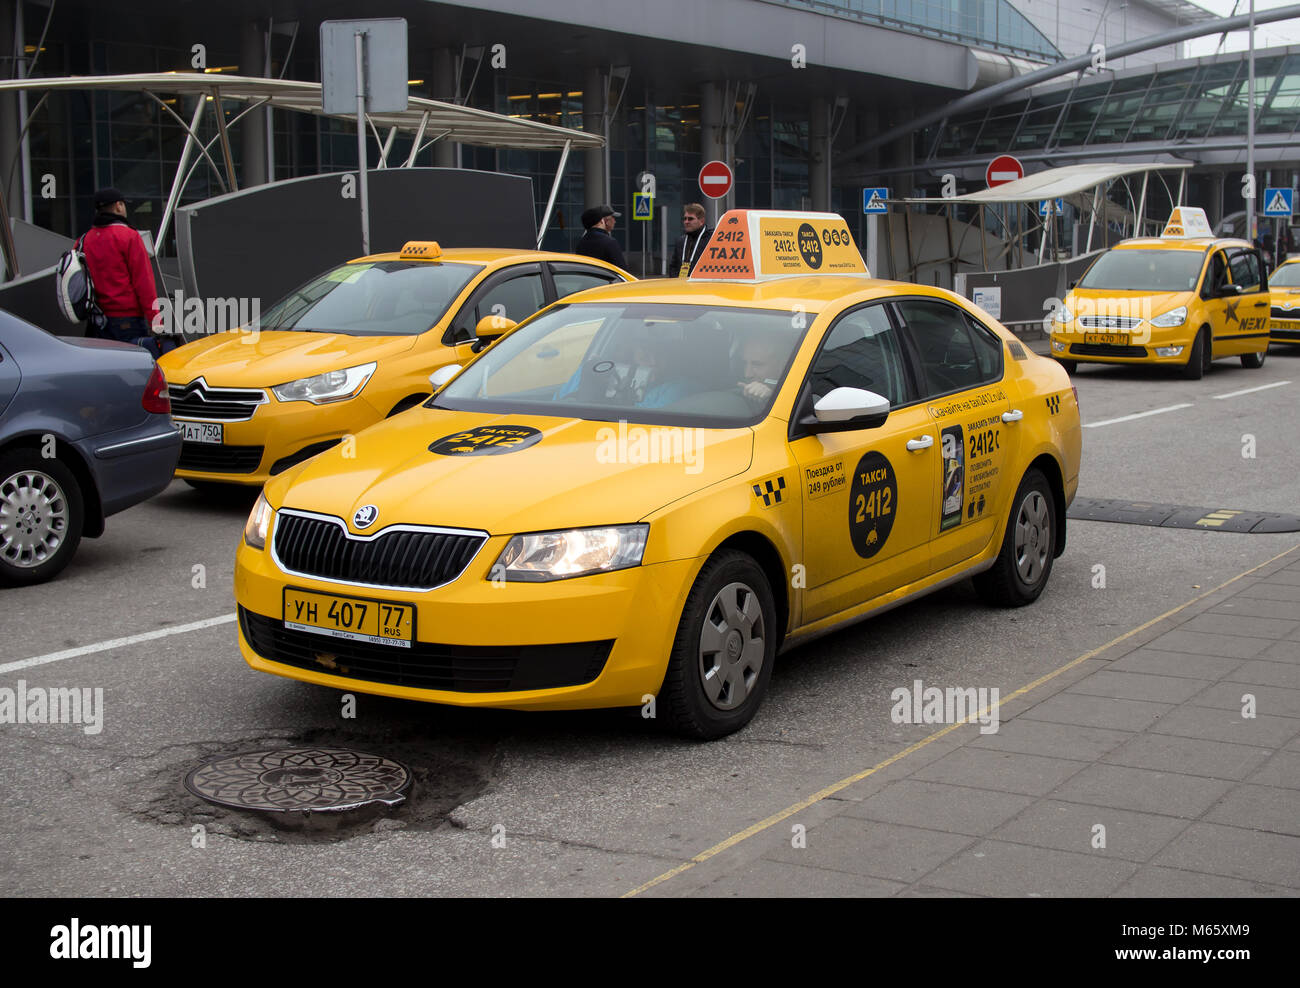 Moscow, Russia - November 07, 2015: Yellow taxi stand at the entrance of the airport Sheremetyevo Stock Photo